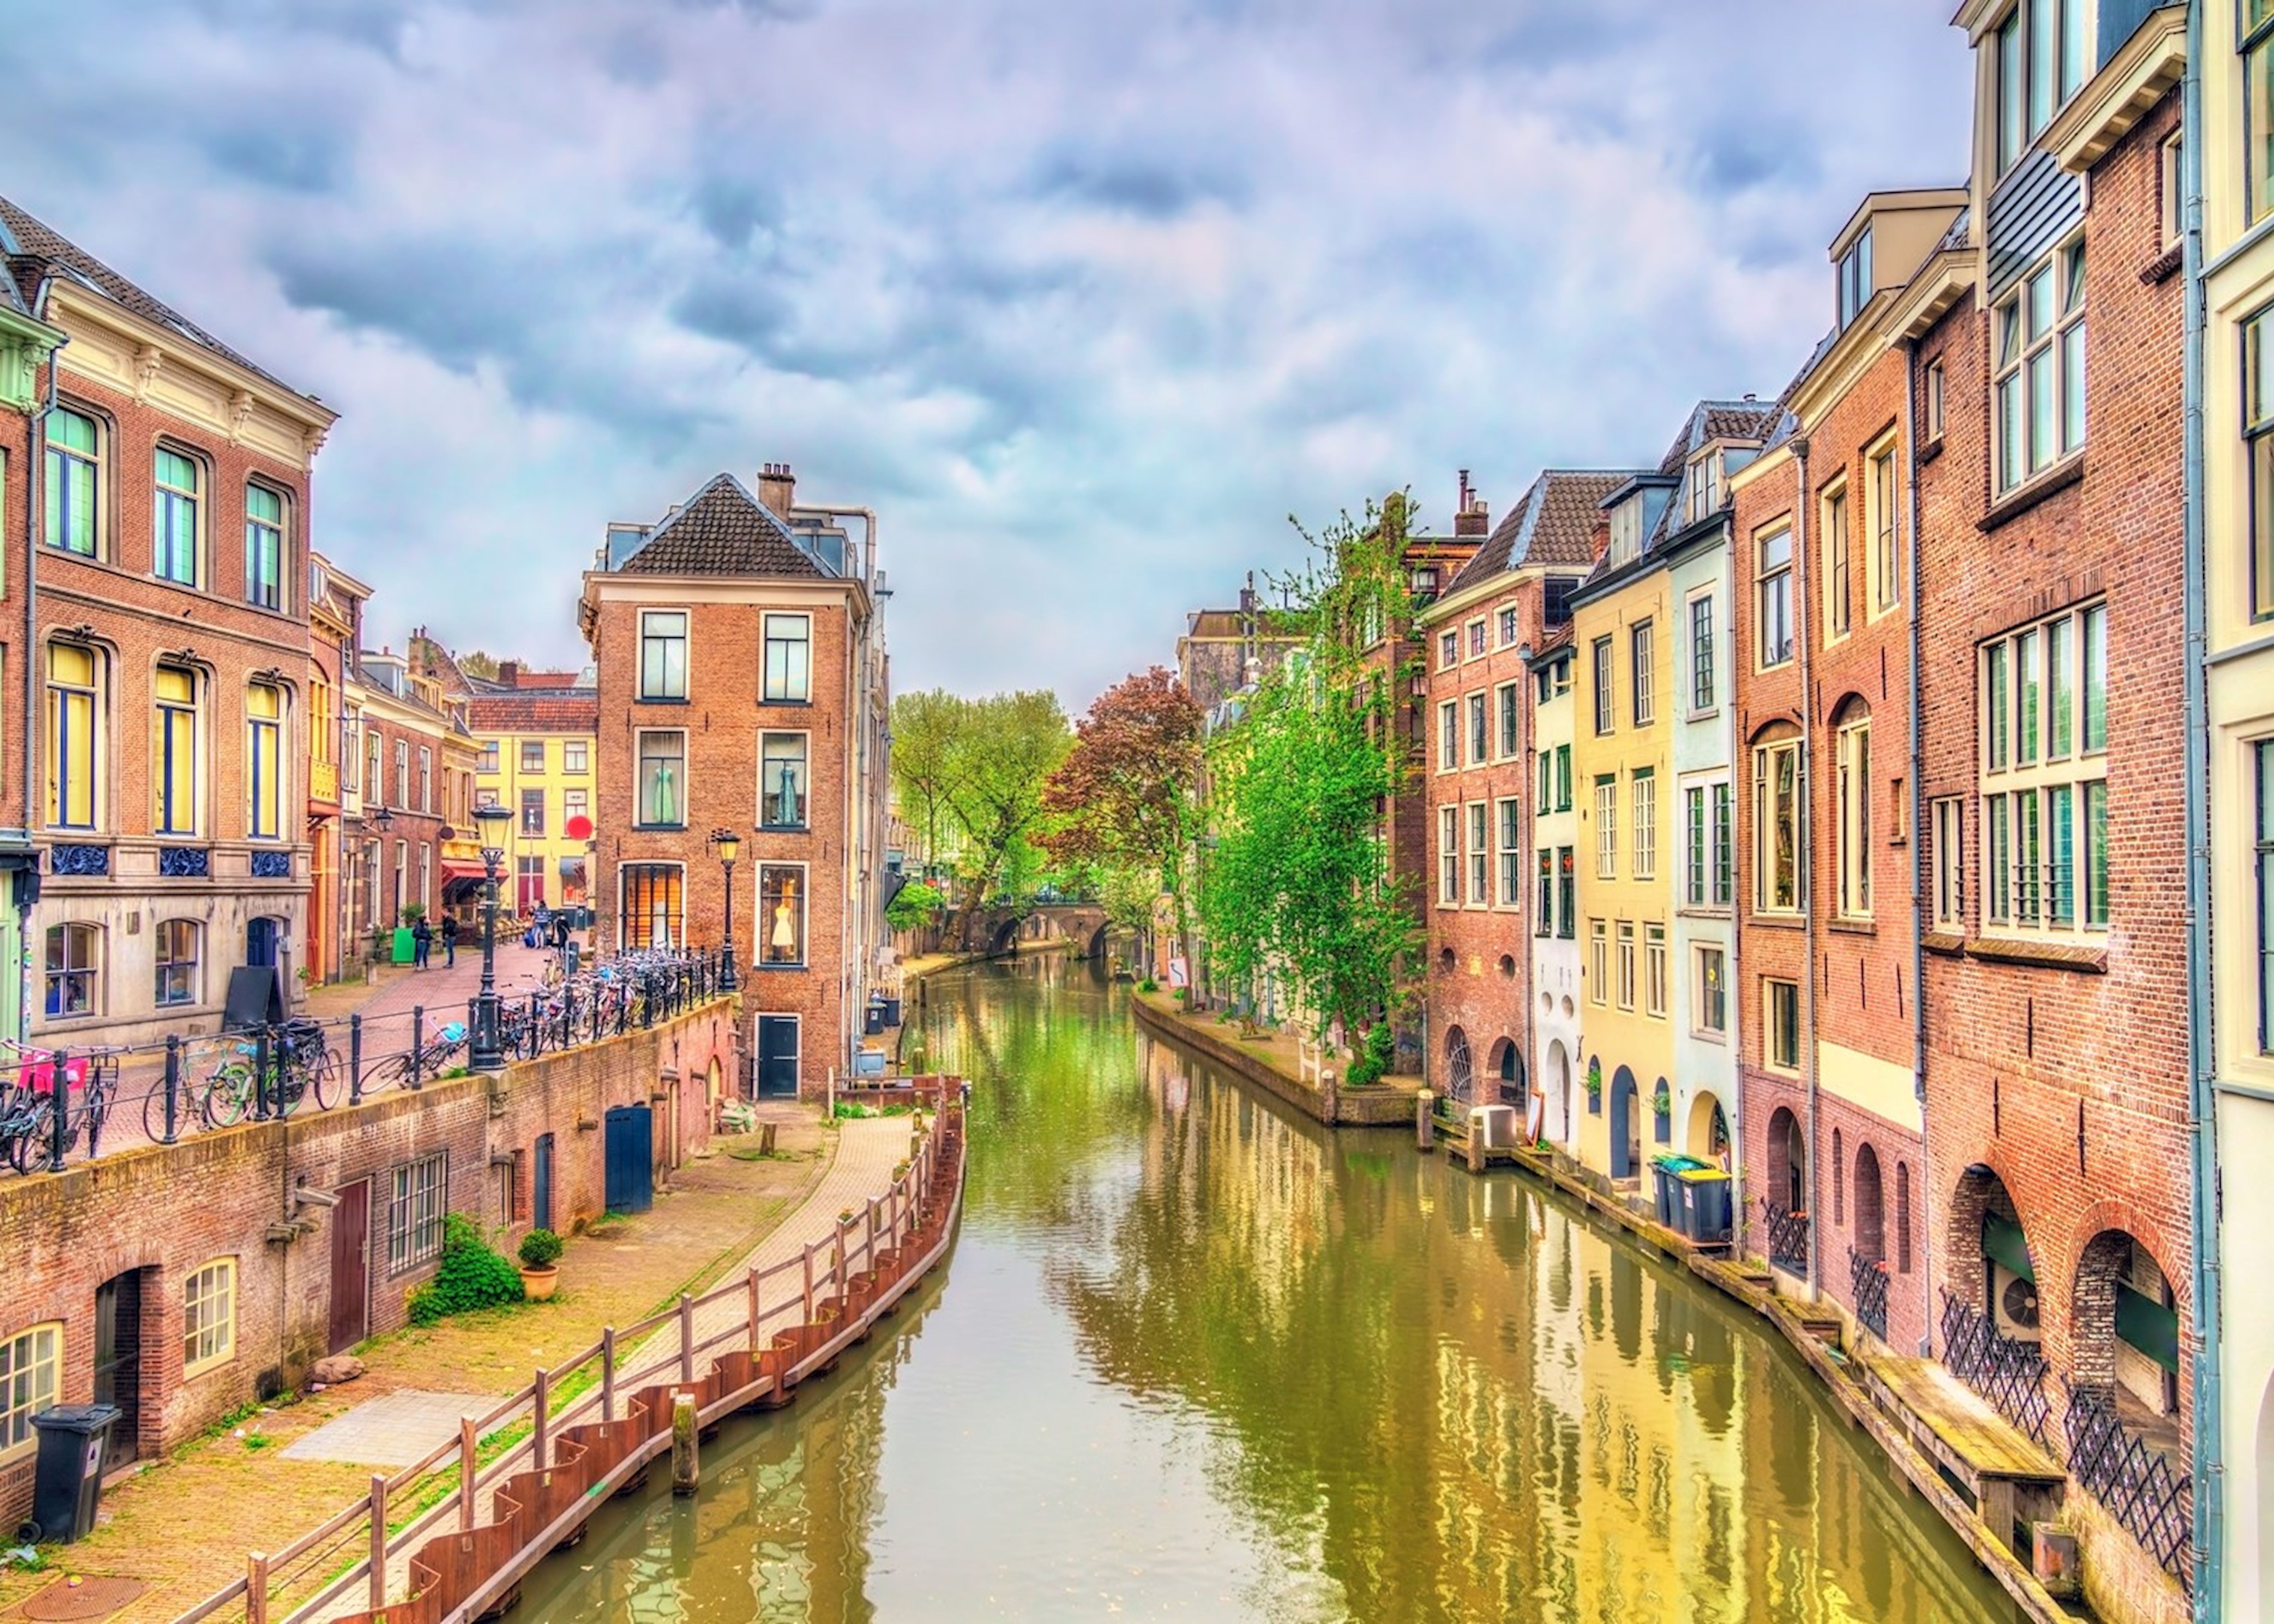 Visit Utrecht on a trip to The Netherlands | Audley Travel